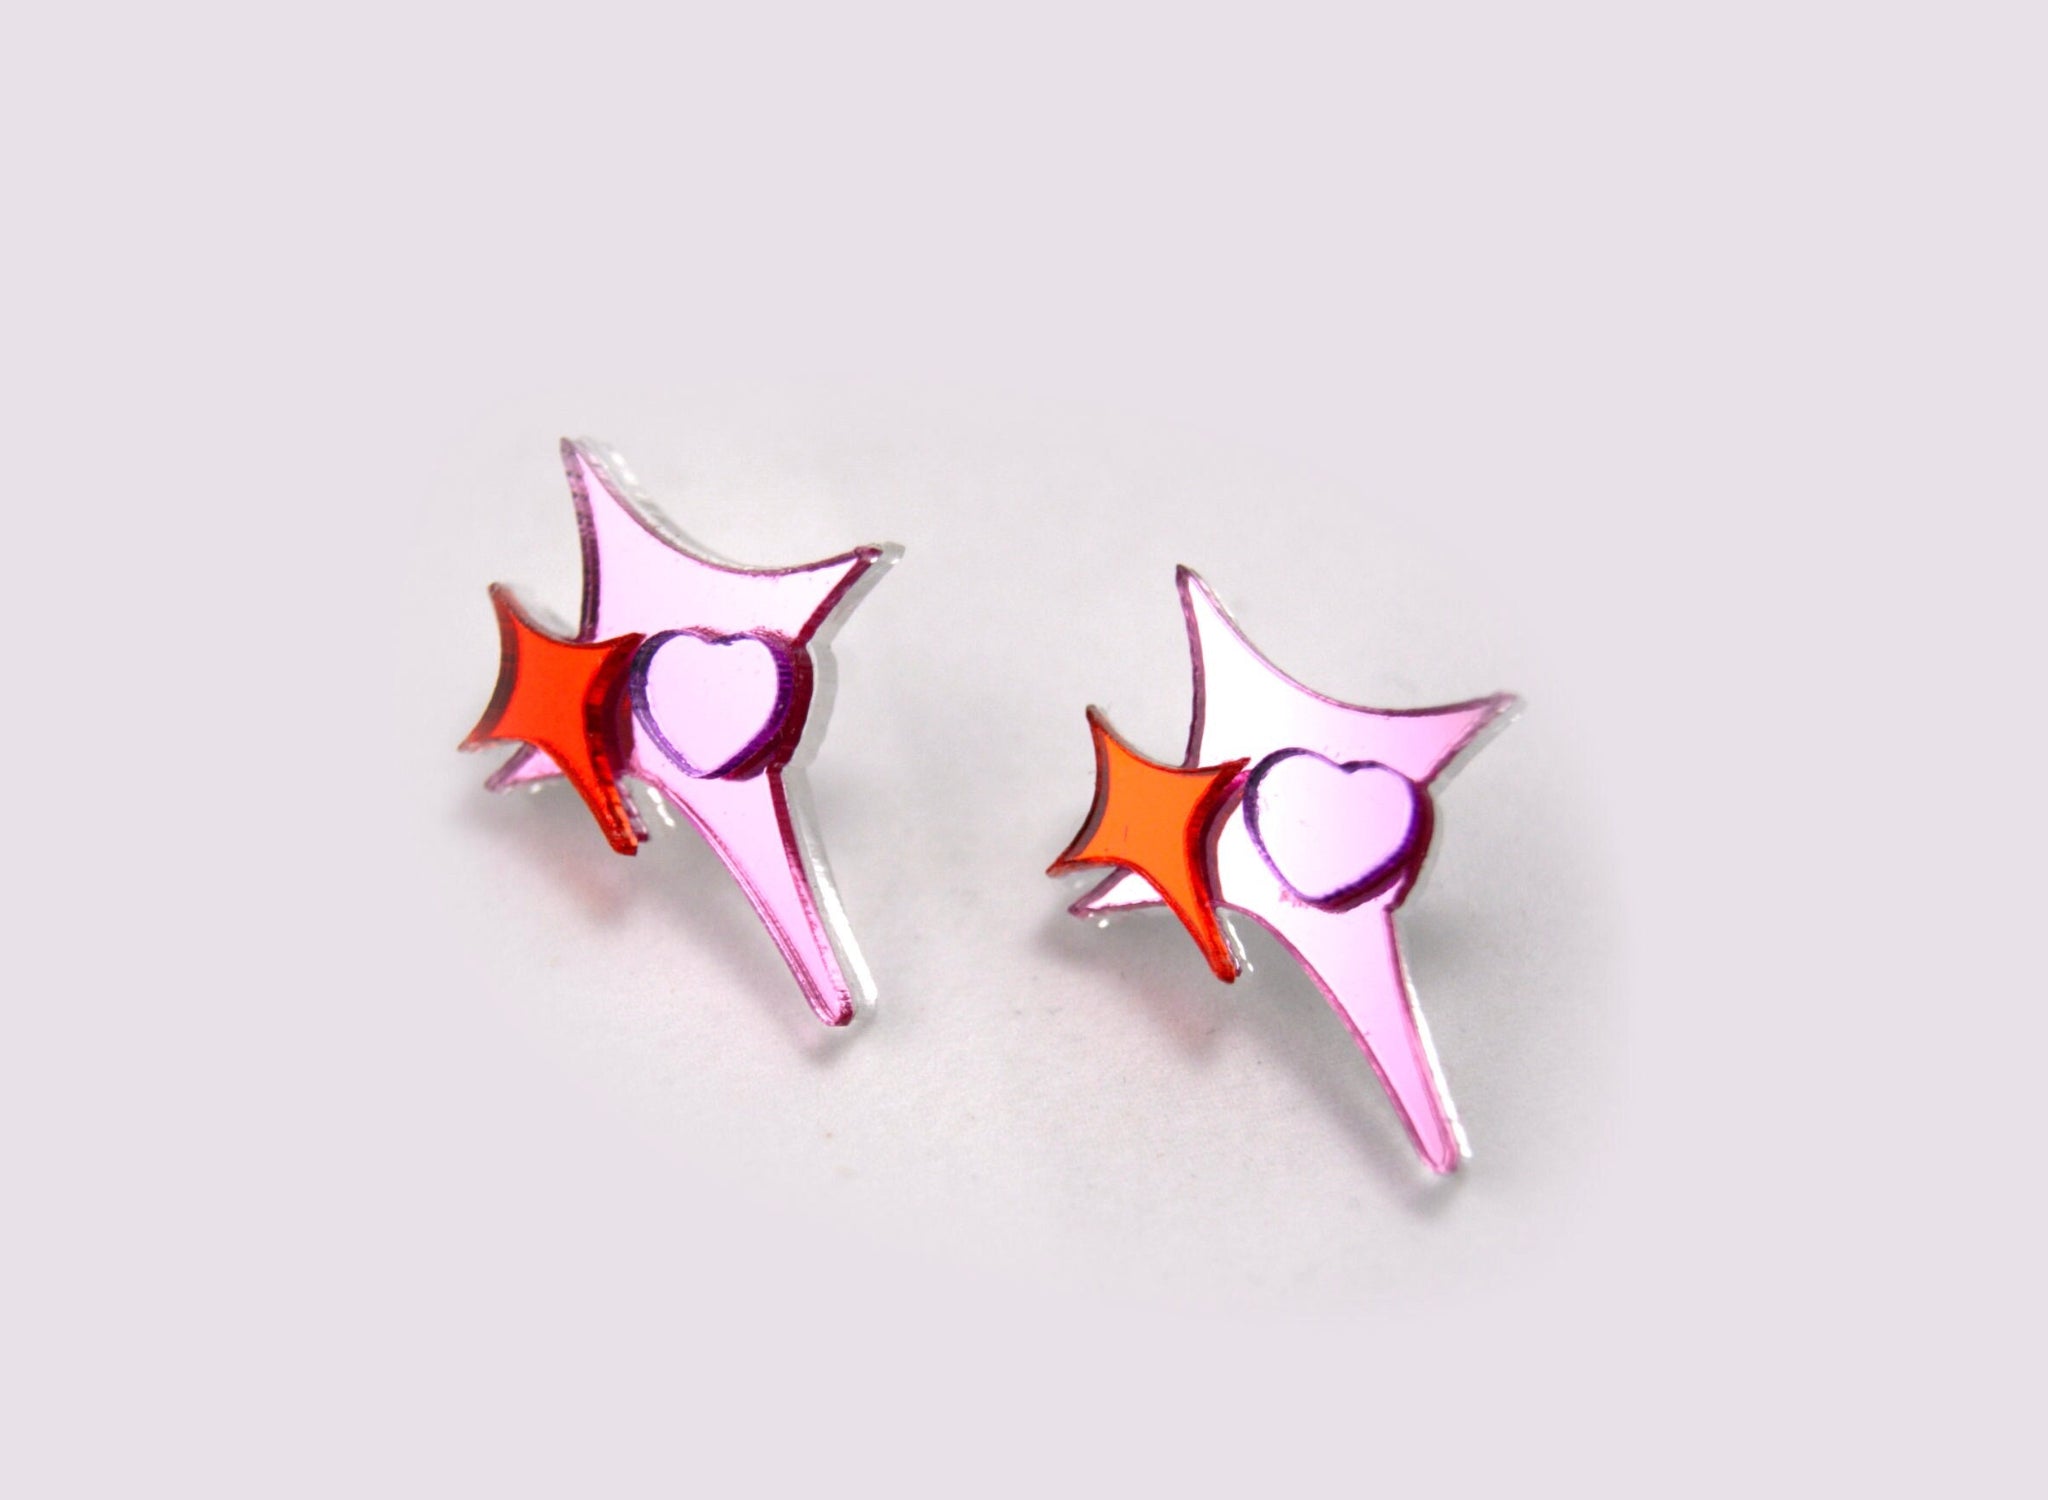 The Shining Sparkle Mirror Earrings | Pink and Red | Super Reflective Acrylic Studs with Mirrored Finish Hearts and Stars | Goose Taffy